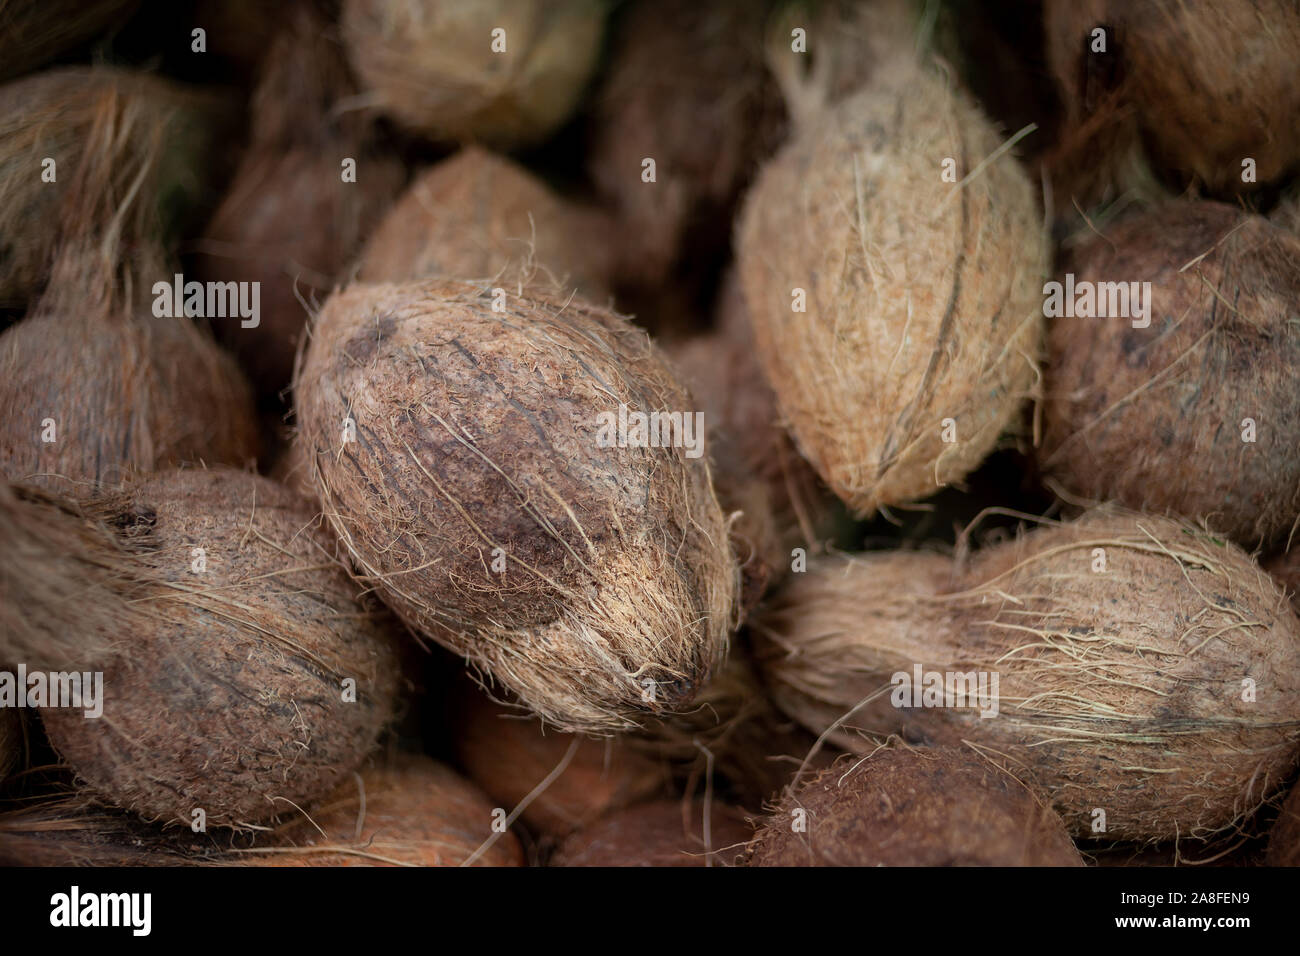 A pile of coconuts. Nicely displayed at a market stand in Little India, Singapore. Stock Photo